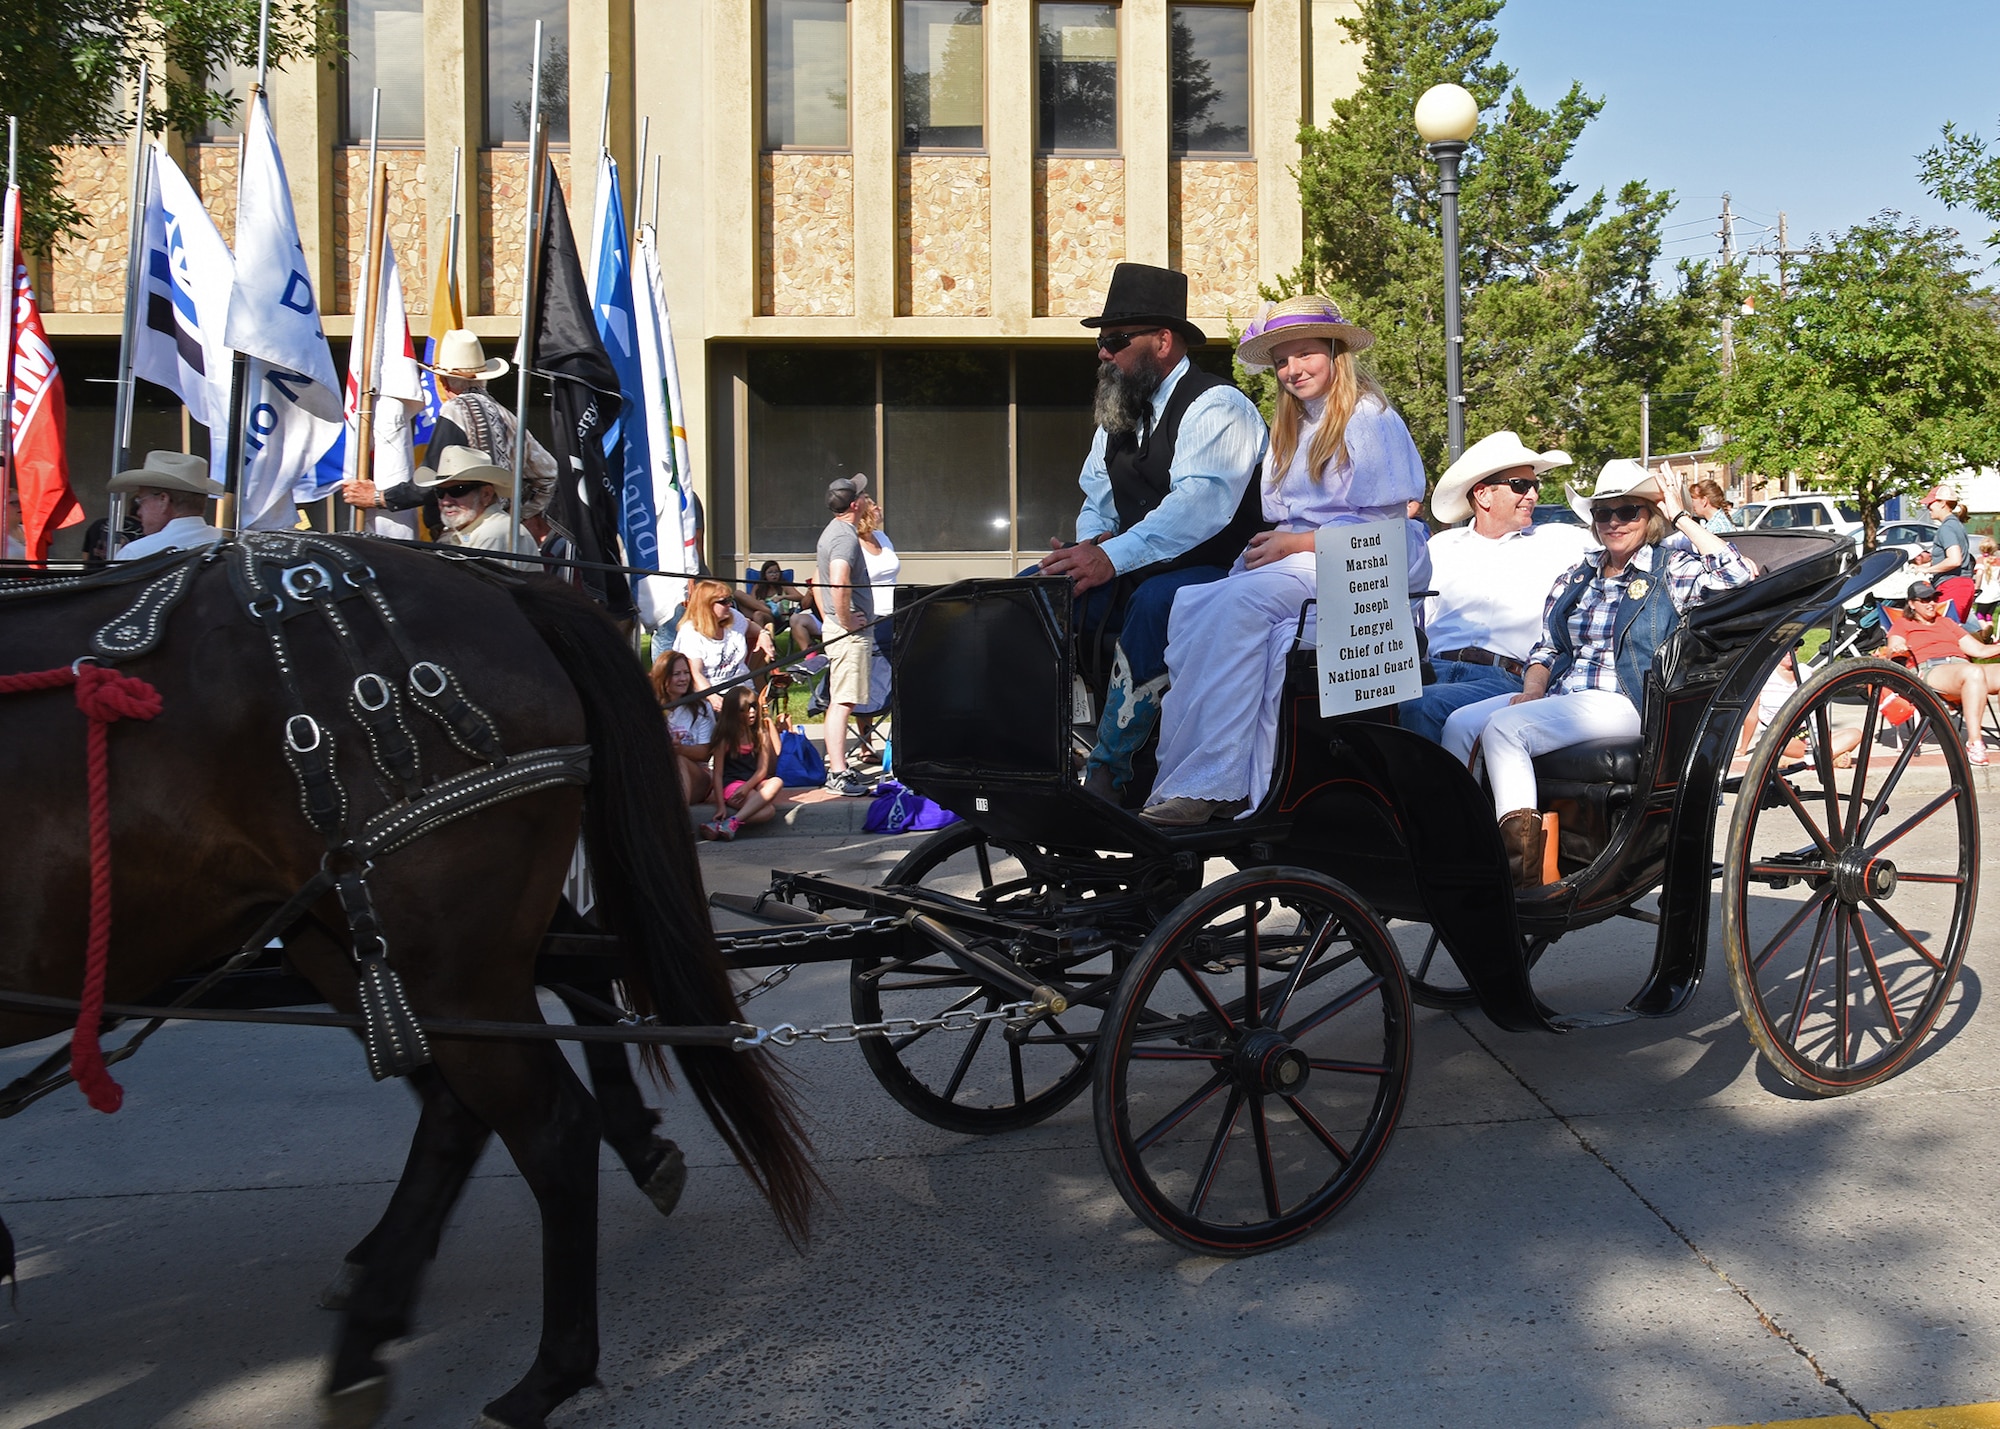 Gen. Joseph Lengyel, National Guard Bureau chief, rides along Capitol Avenue during the 122nd Cheyenne Frontier Days opening grand parade in Cheyenne, Wyo., July 21, 2018. Lengyel served as the Grand Marshal of the parade and opening ceremonies which officially mark the beginning of CFD. The F.E. Warren Air Force Base and Cheyenne communities came together to celebrate the CFD rodeo and festival, which runs from July 20-29. (U.S. Air Force photo by Glenn Robertson)